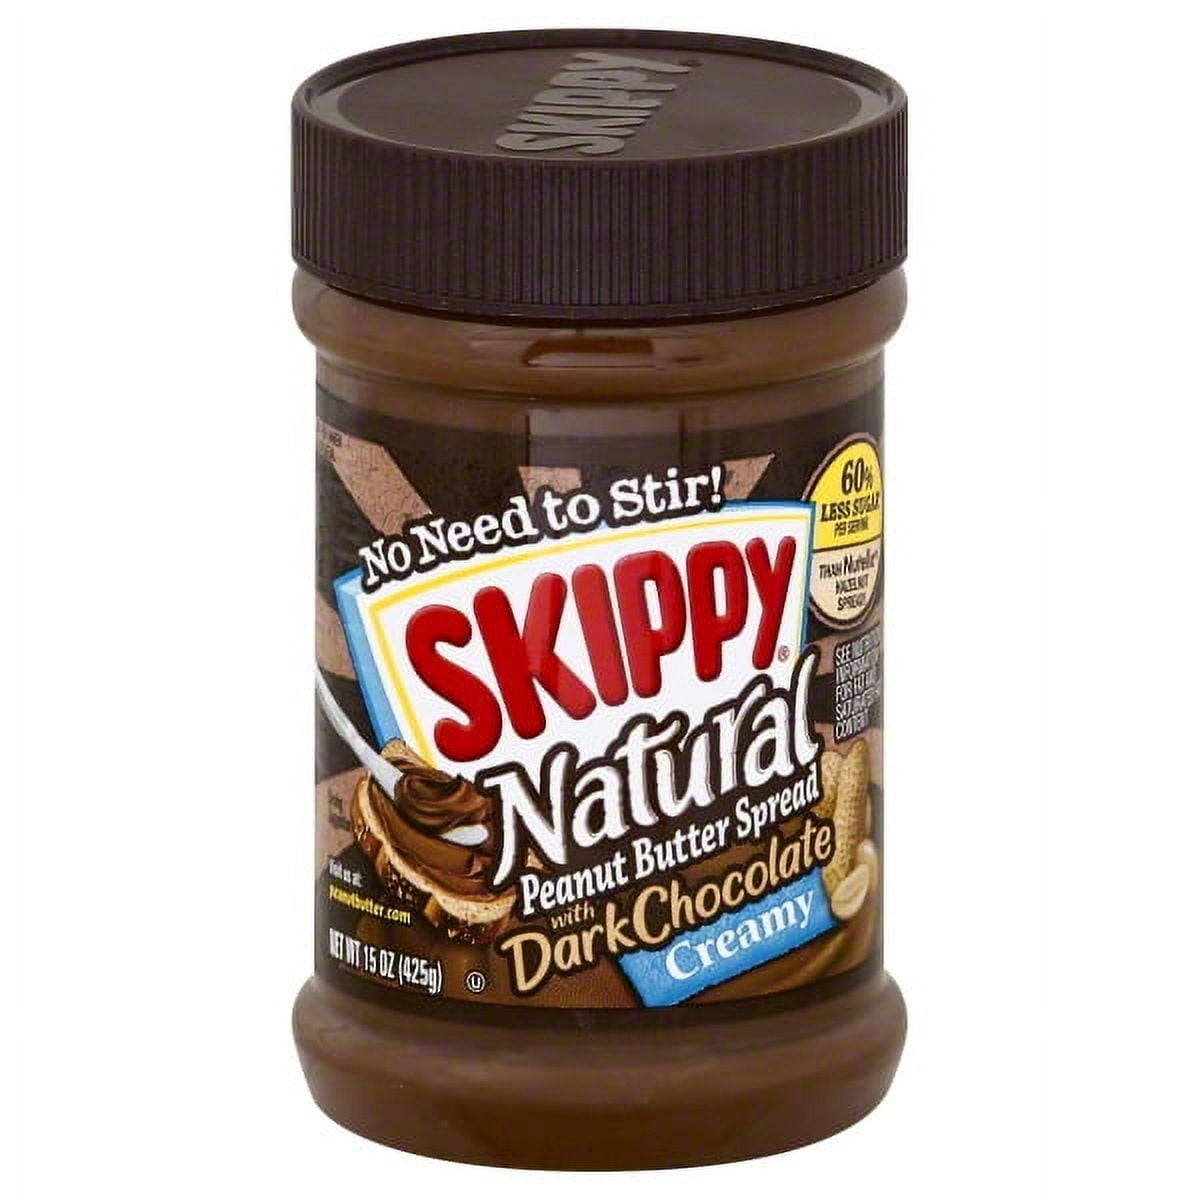 Skippy Created the PBJ X Pro for National Peanut Butter and Jelly Day -  Hormel Foods